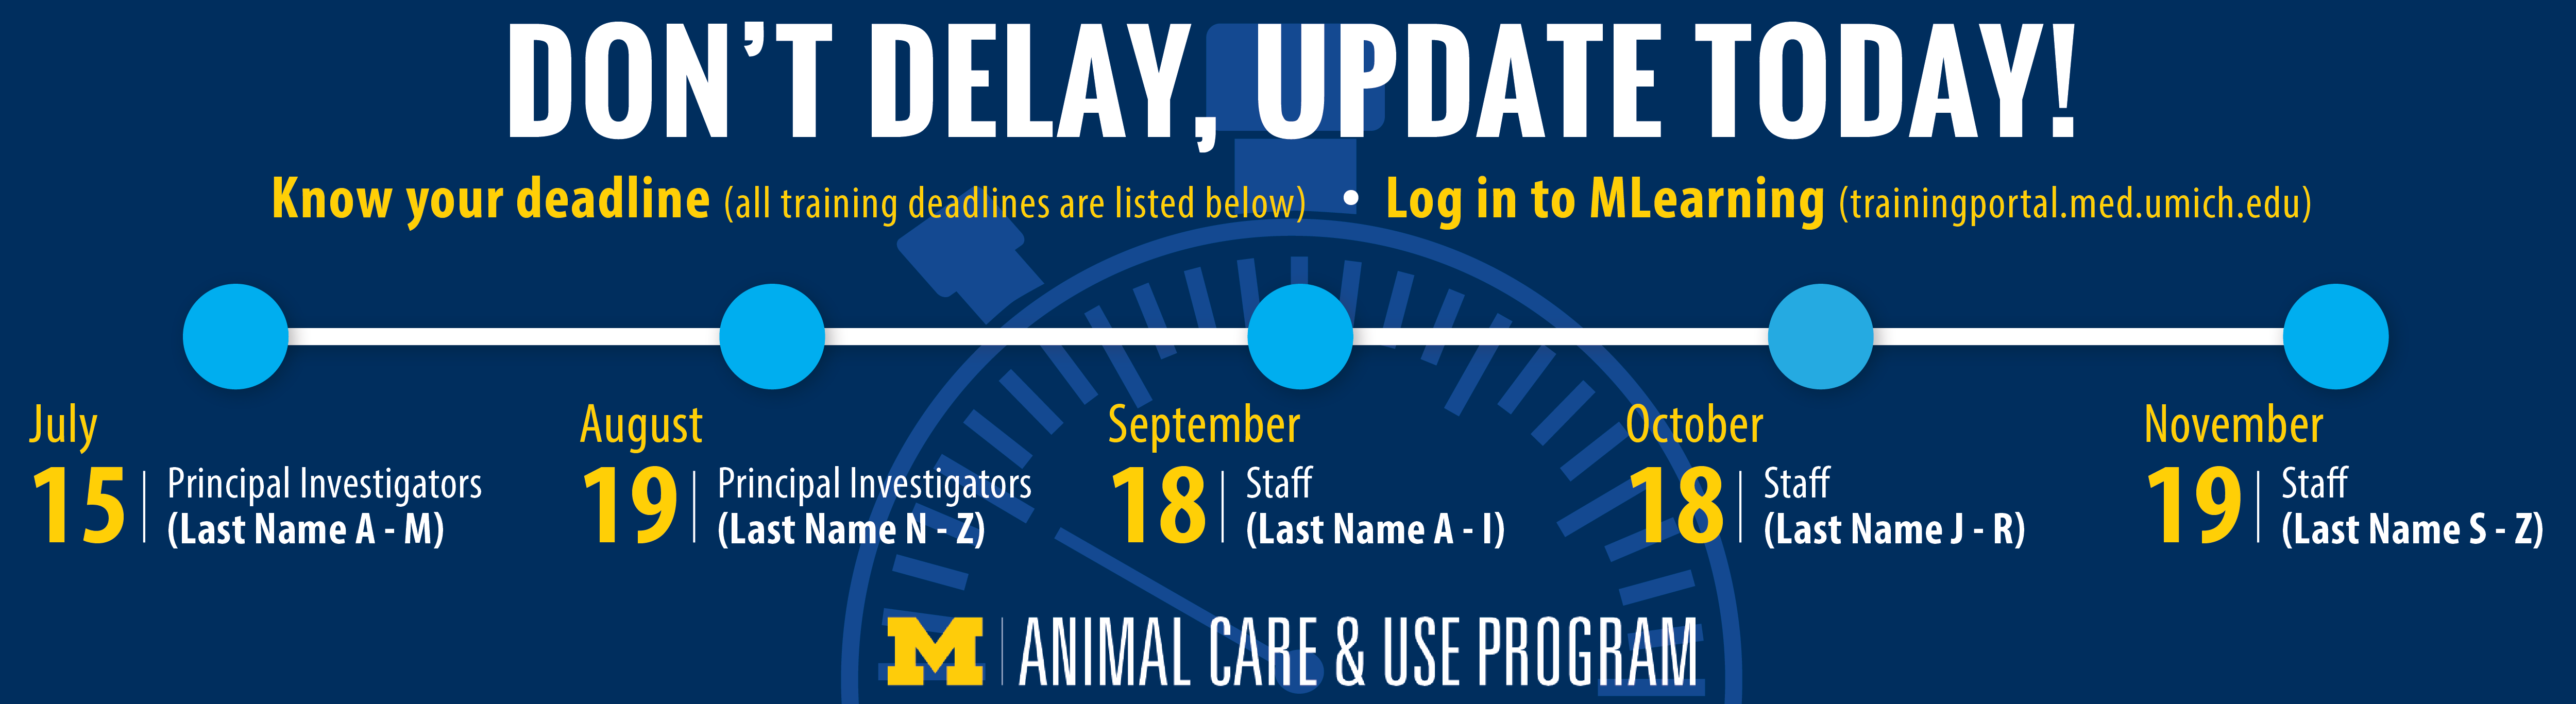 Infographic outlining deadlines for new animal care and use training requirement